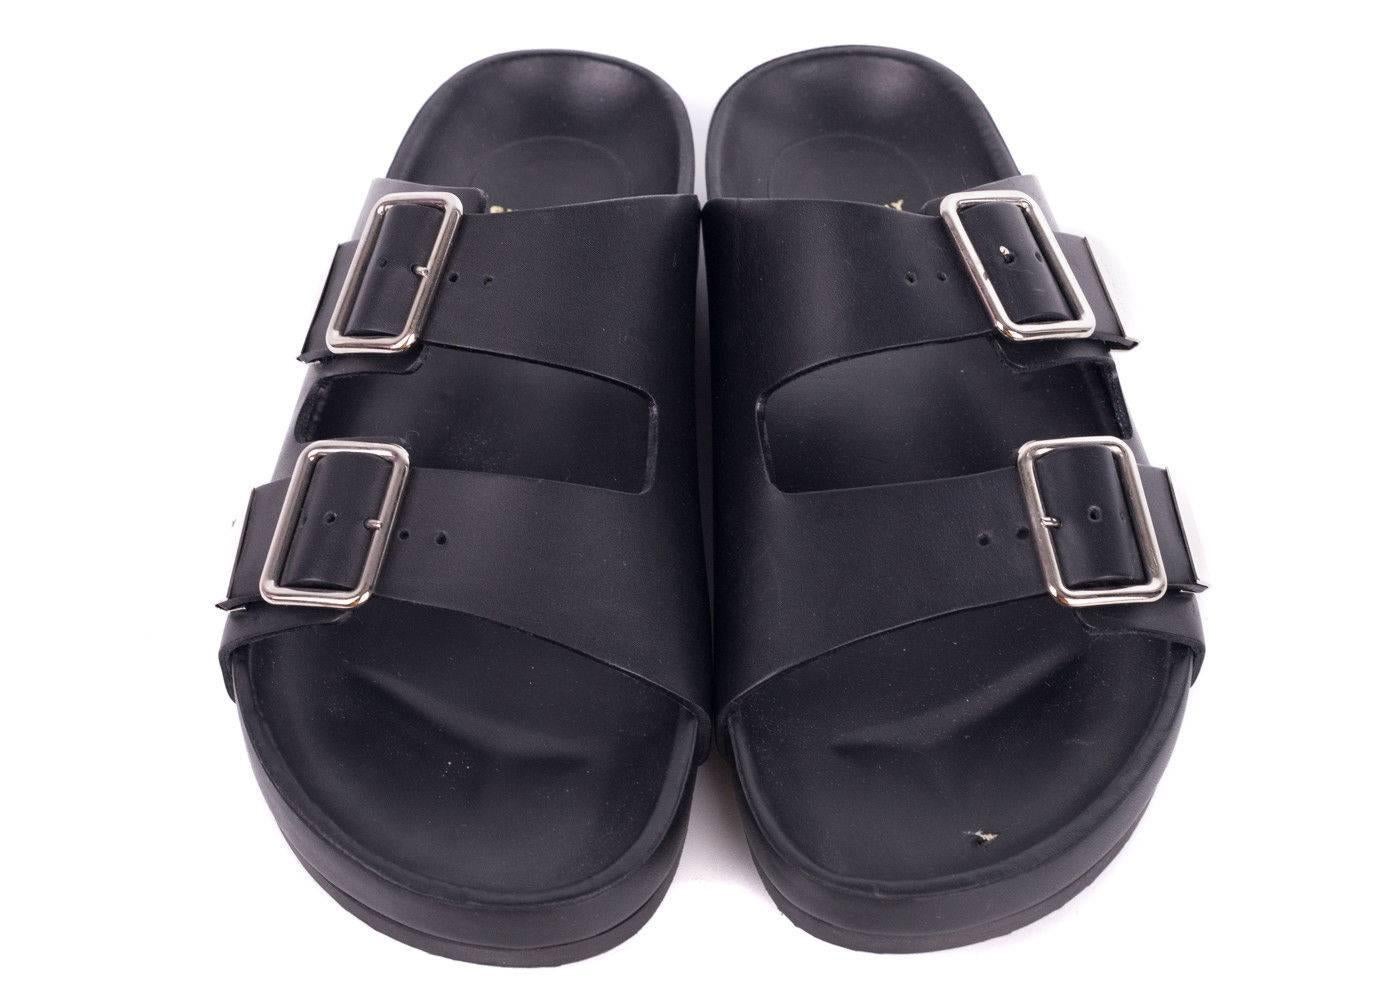 Strut in style with cool-chic elegance courtesy of Givenchy. This sandal is the ultimate minimalistic, long wearing slide. Featuring a simplistic design and dual buckle strap with silver accents. Slide into these for a busy day of errands or